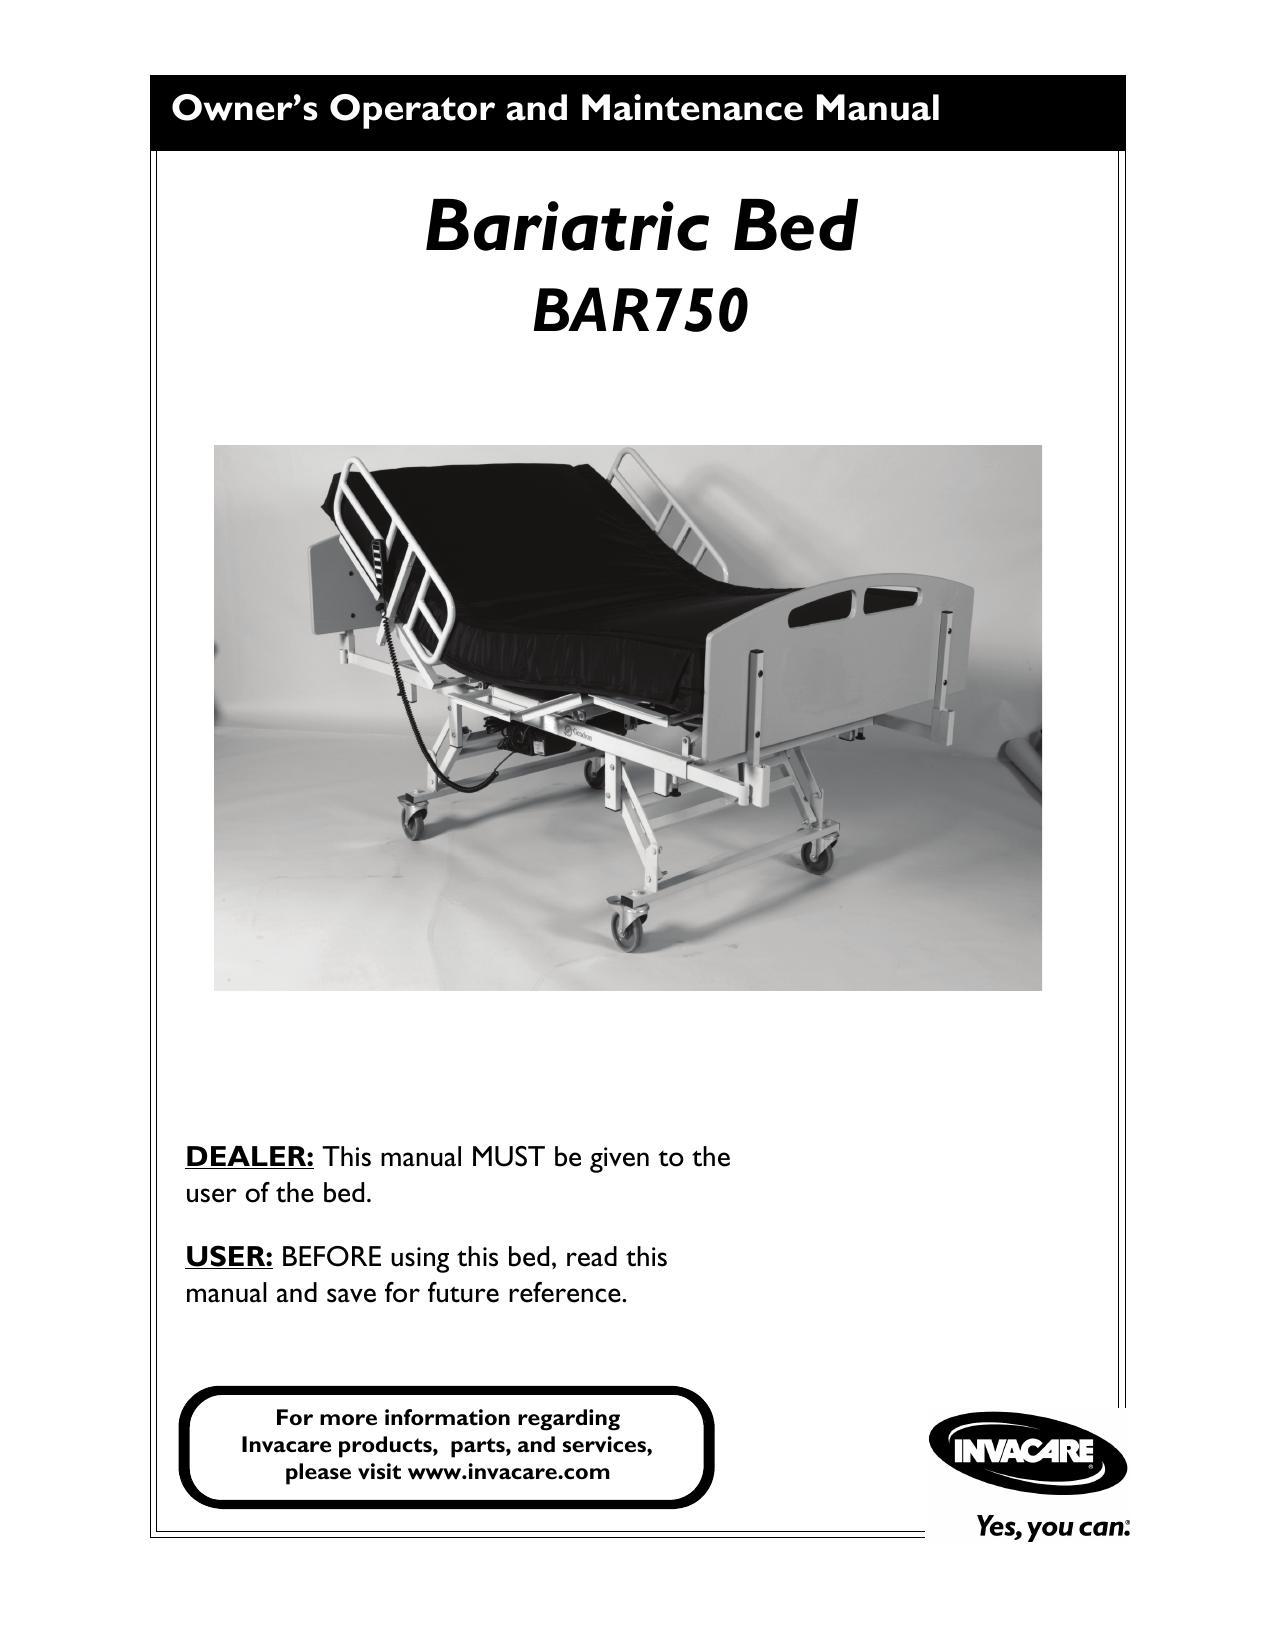 owners-operator-and-maintenance-manual-for-invacare-bariatric-bed-bar75o.pdf